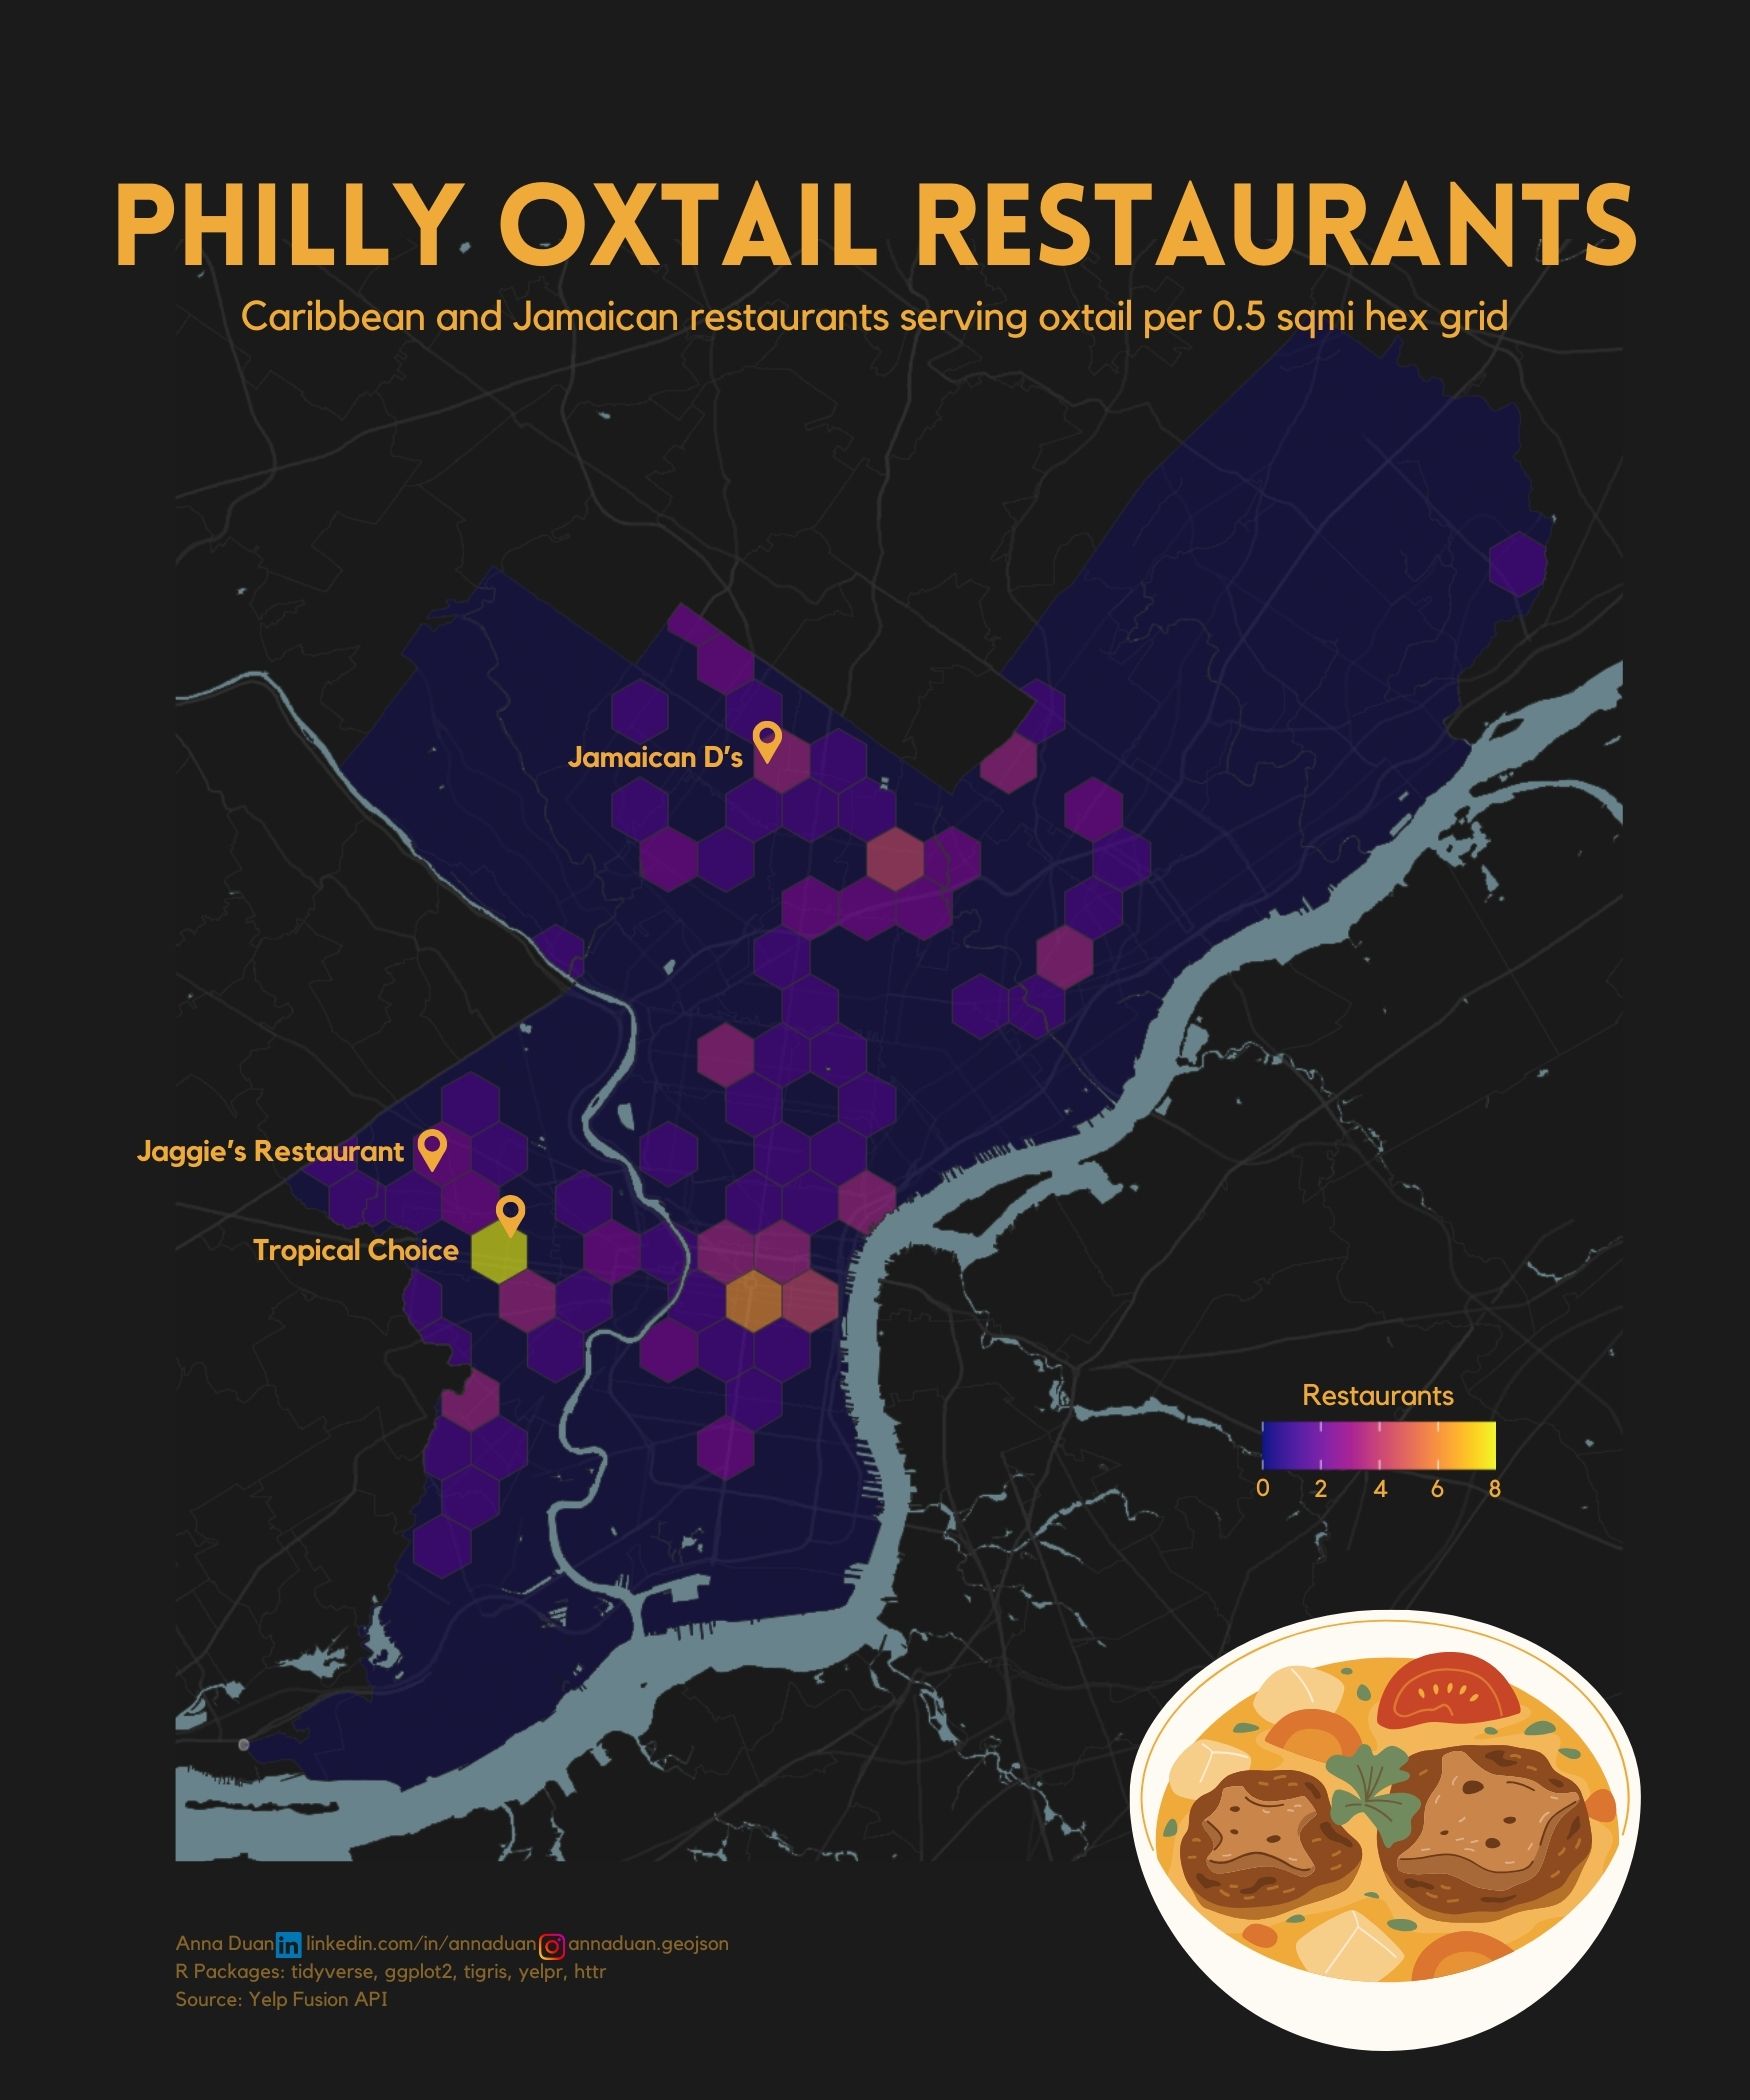 Thumbnail image of Philly oxtail restaurants by Anna Duan